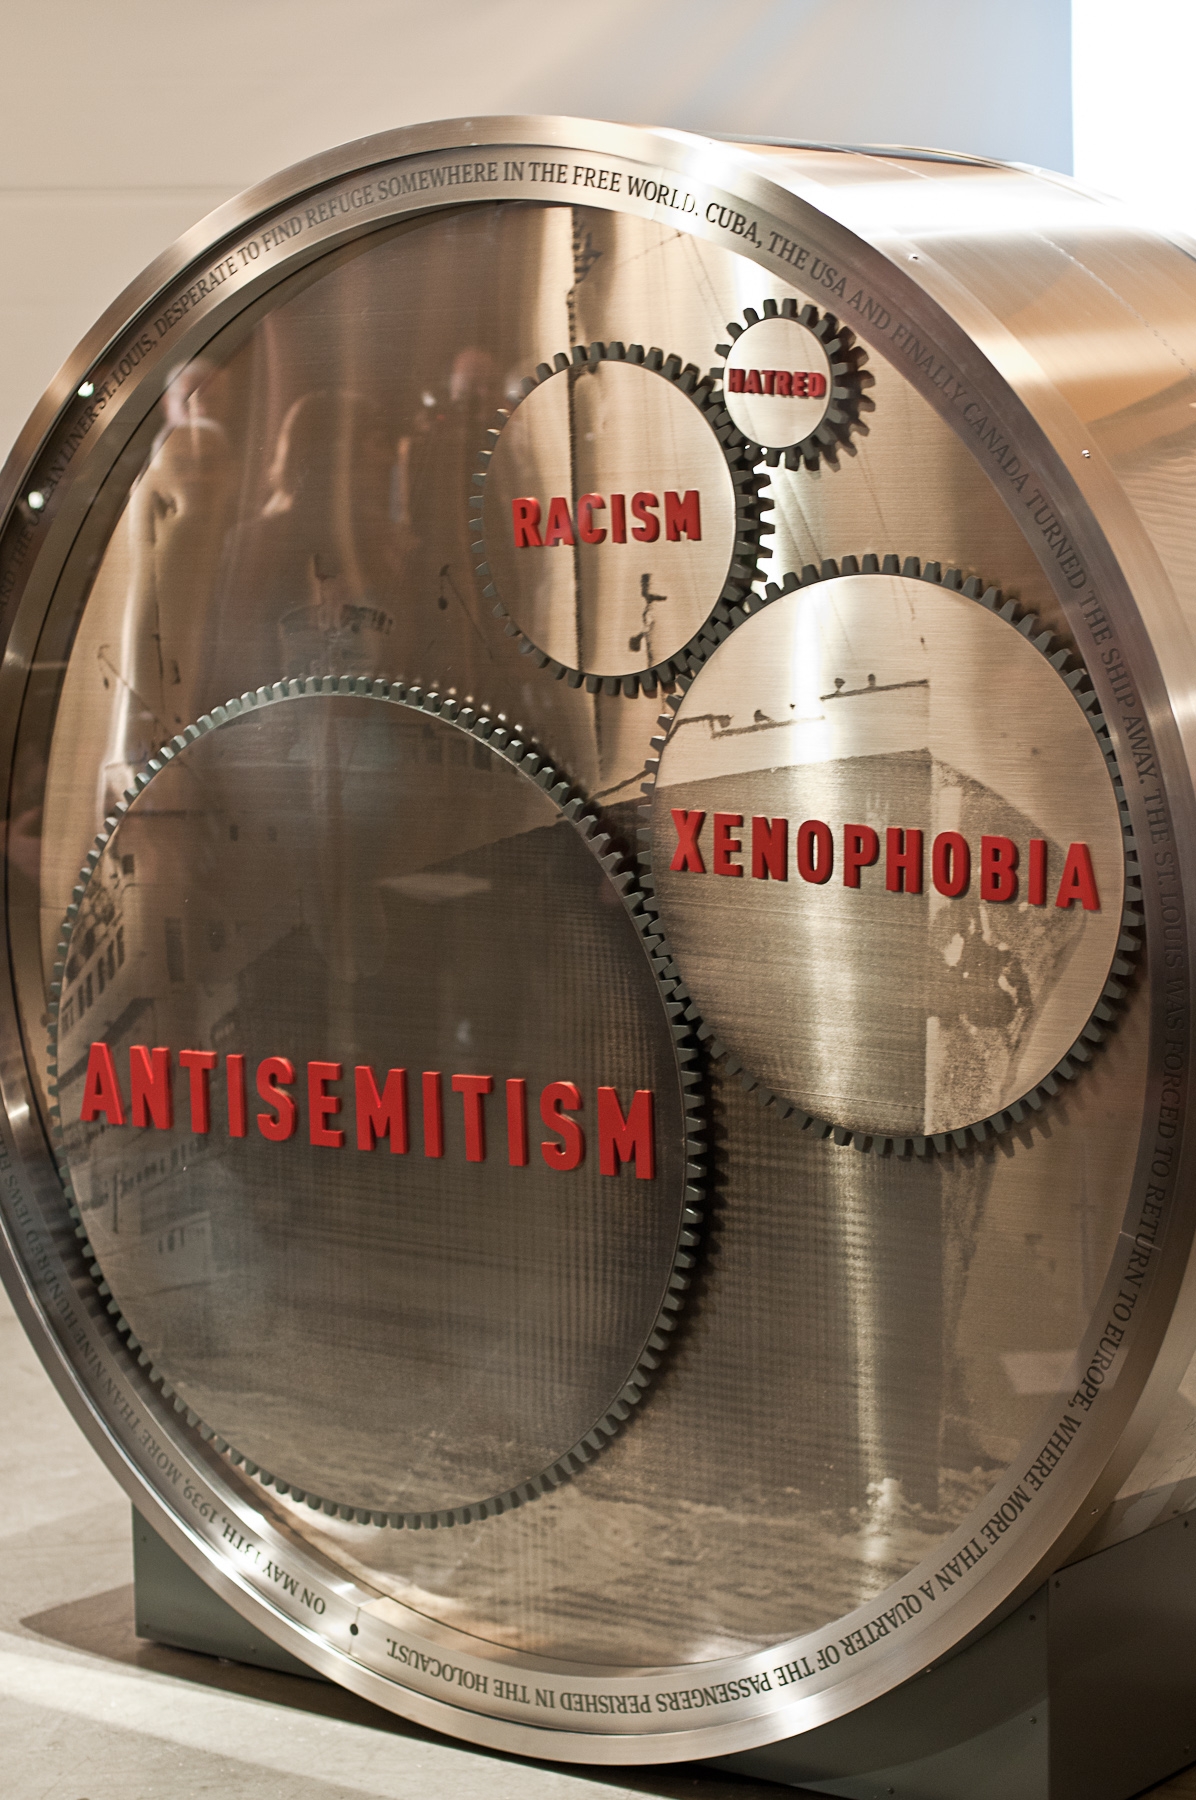 Wheel of conscience showing the words: Antisemitism Xenophobia, Racism and Hatred